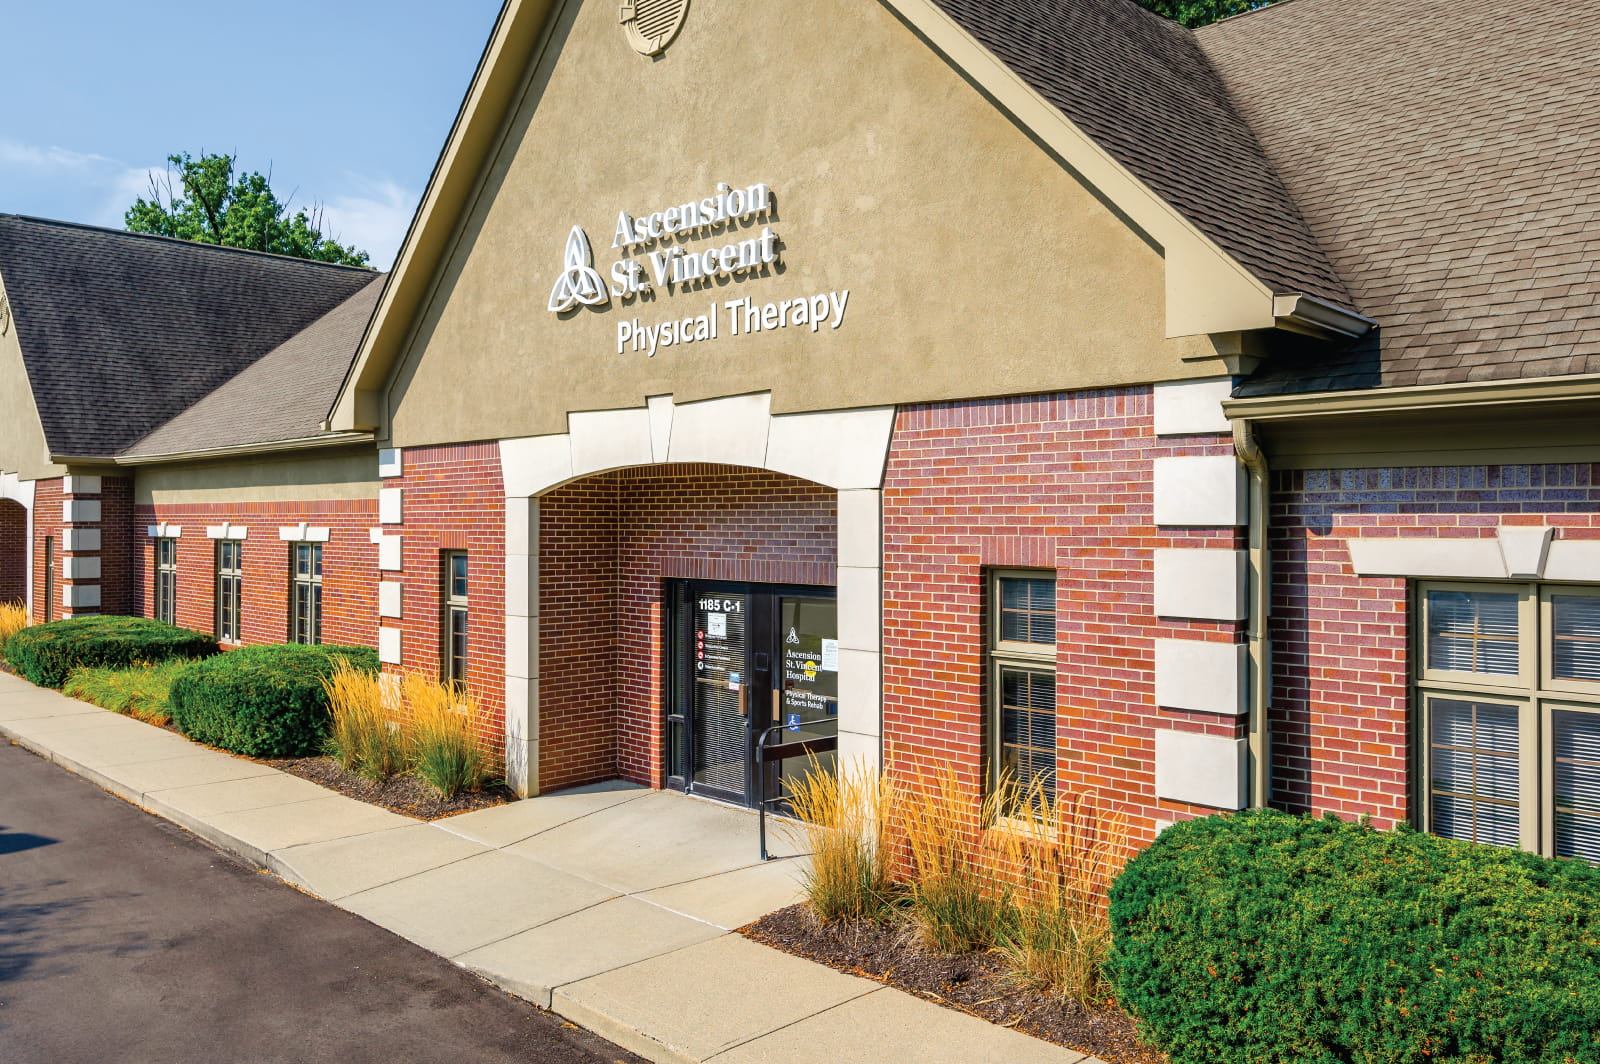 Ascension St. Vincent Hospital Carmel Physical Therapy